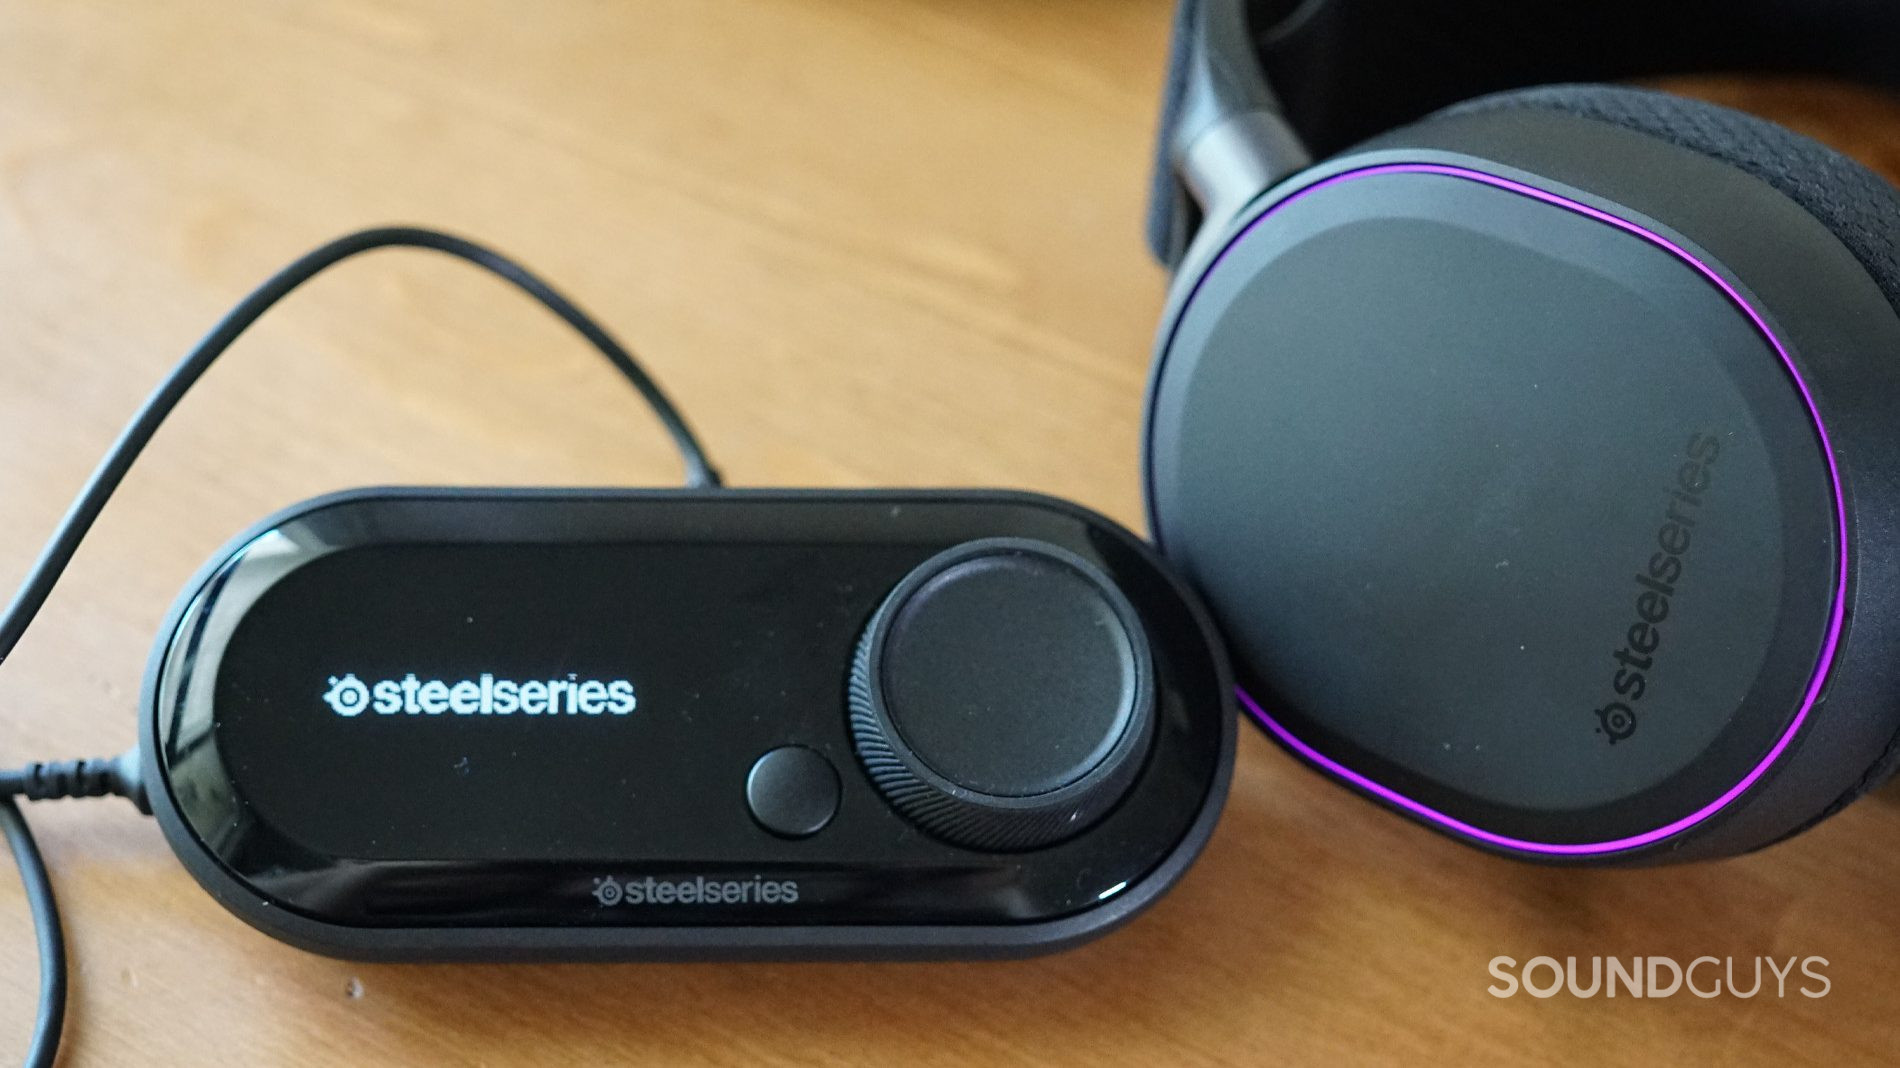 The SteelSeries Arctis Pro + GameDAC sits on a wooden table plugged in and turned on.